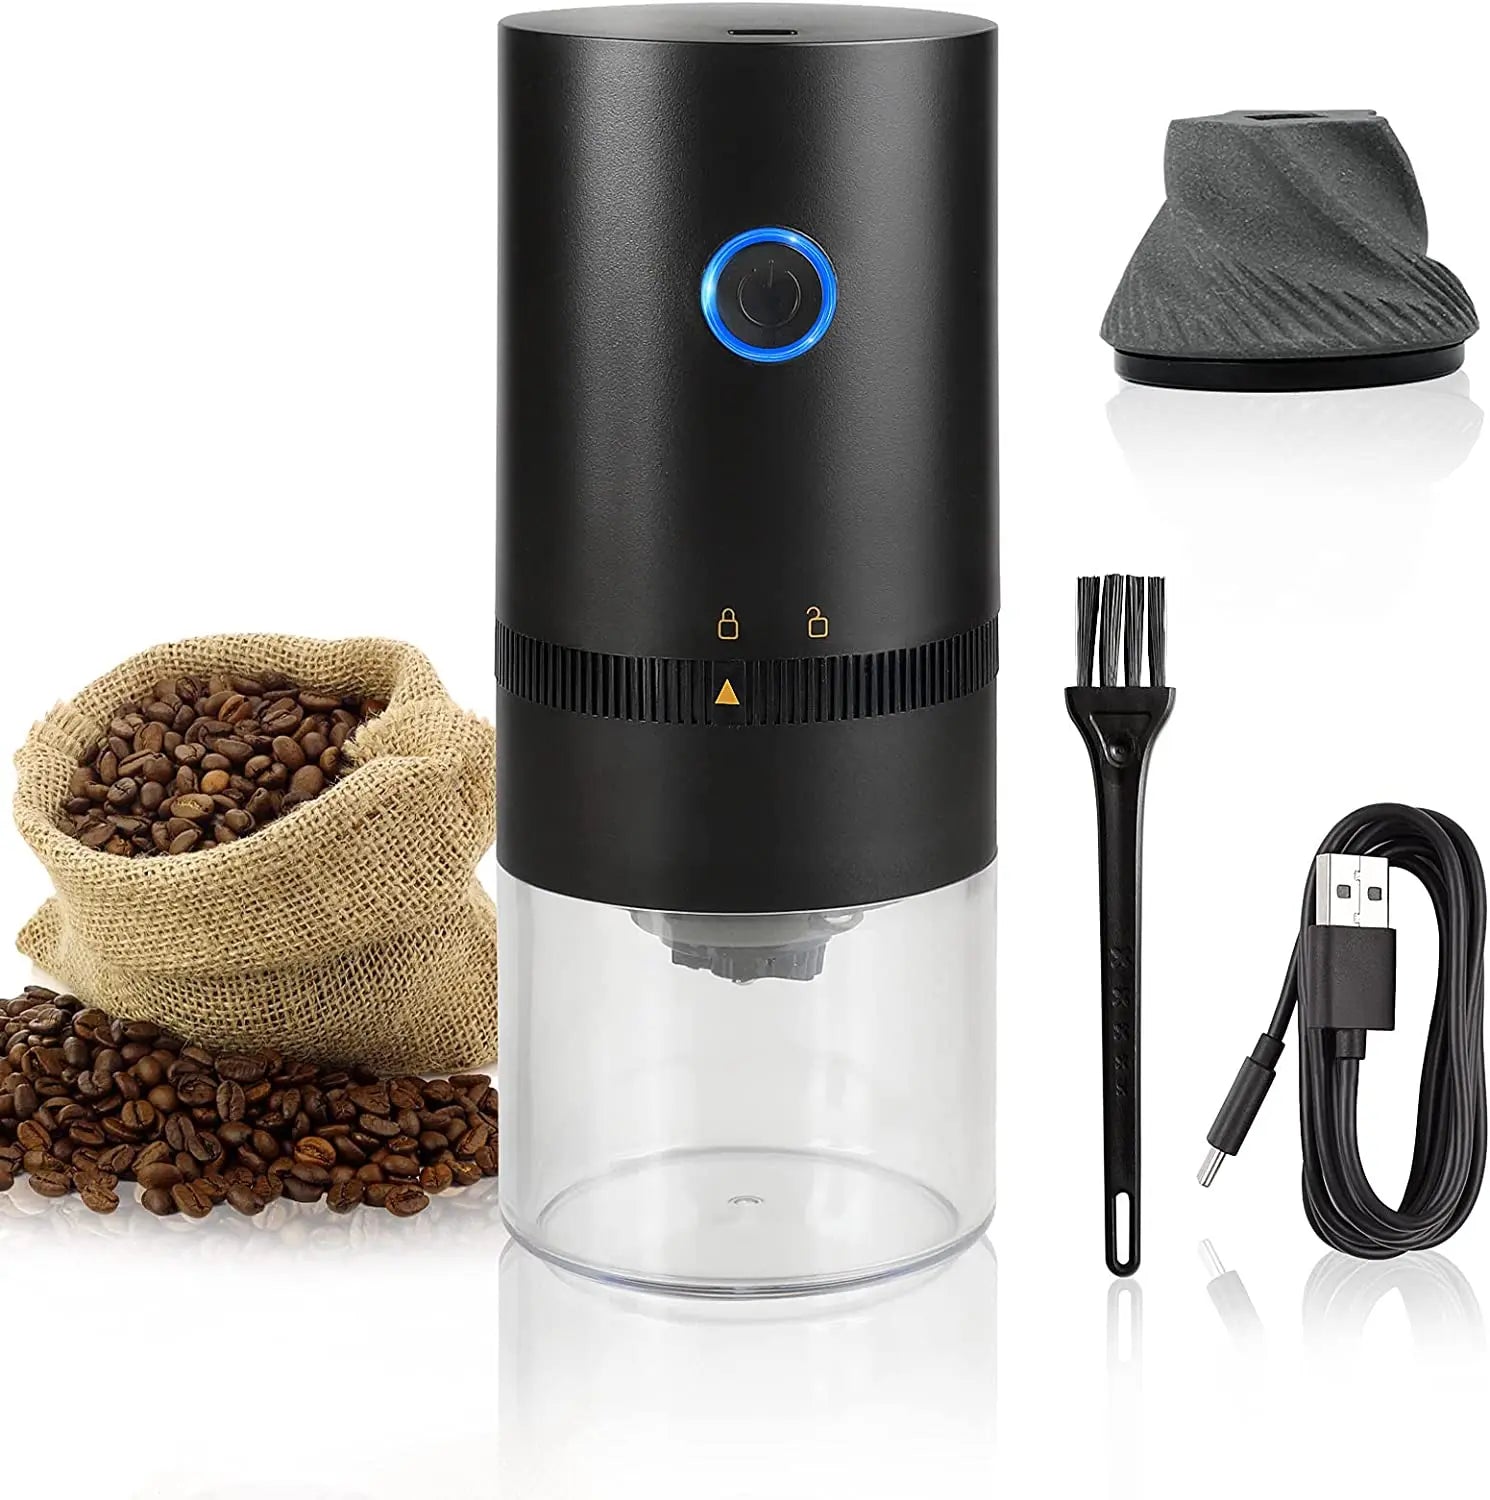 Portable Electric Coffee Grinder - easynow.com